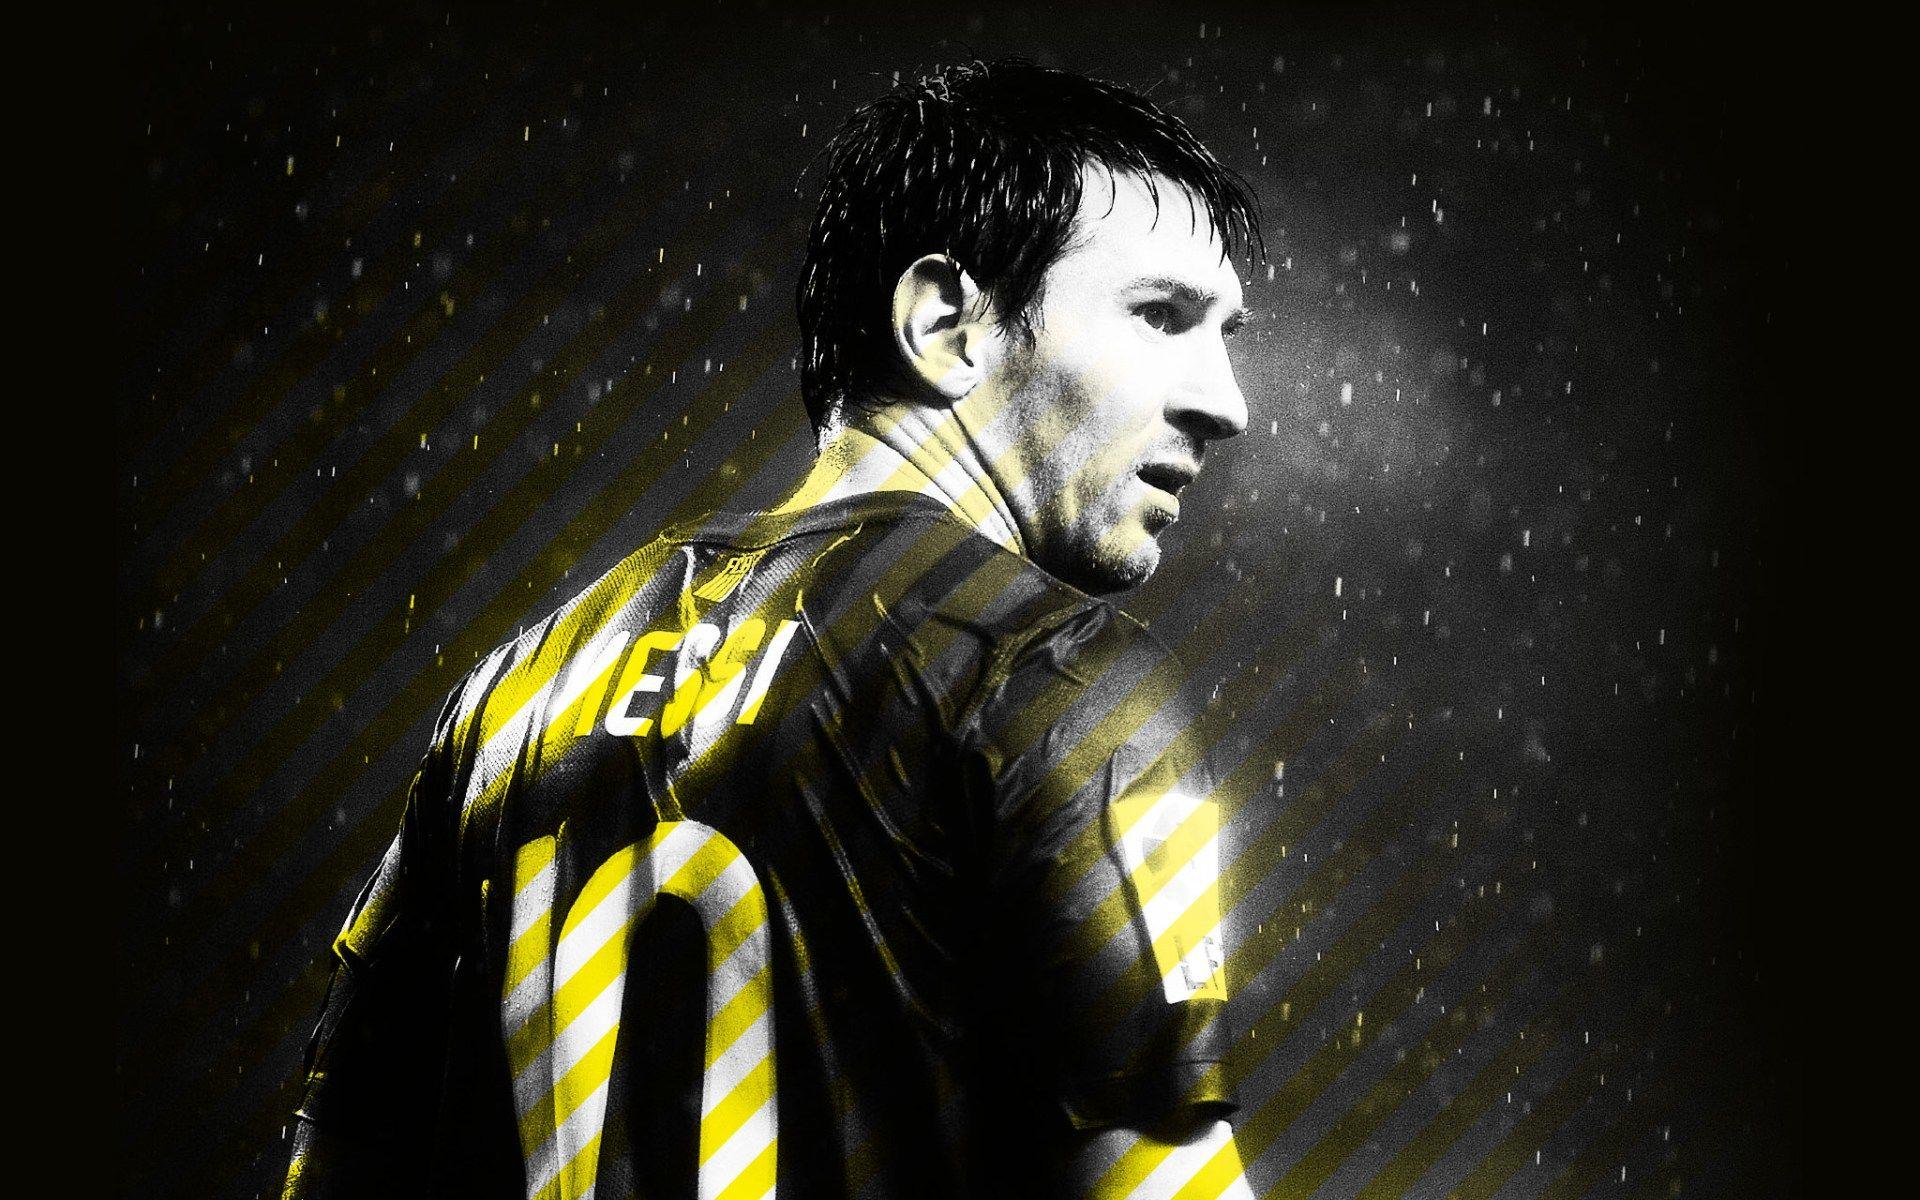 HD Wallpapers Of Messi - Wallpaper Cave